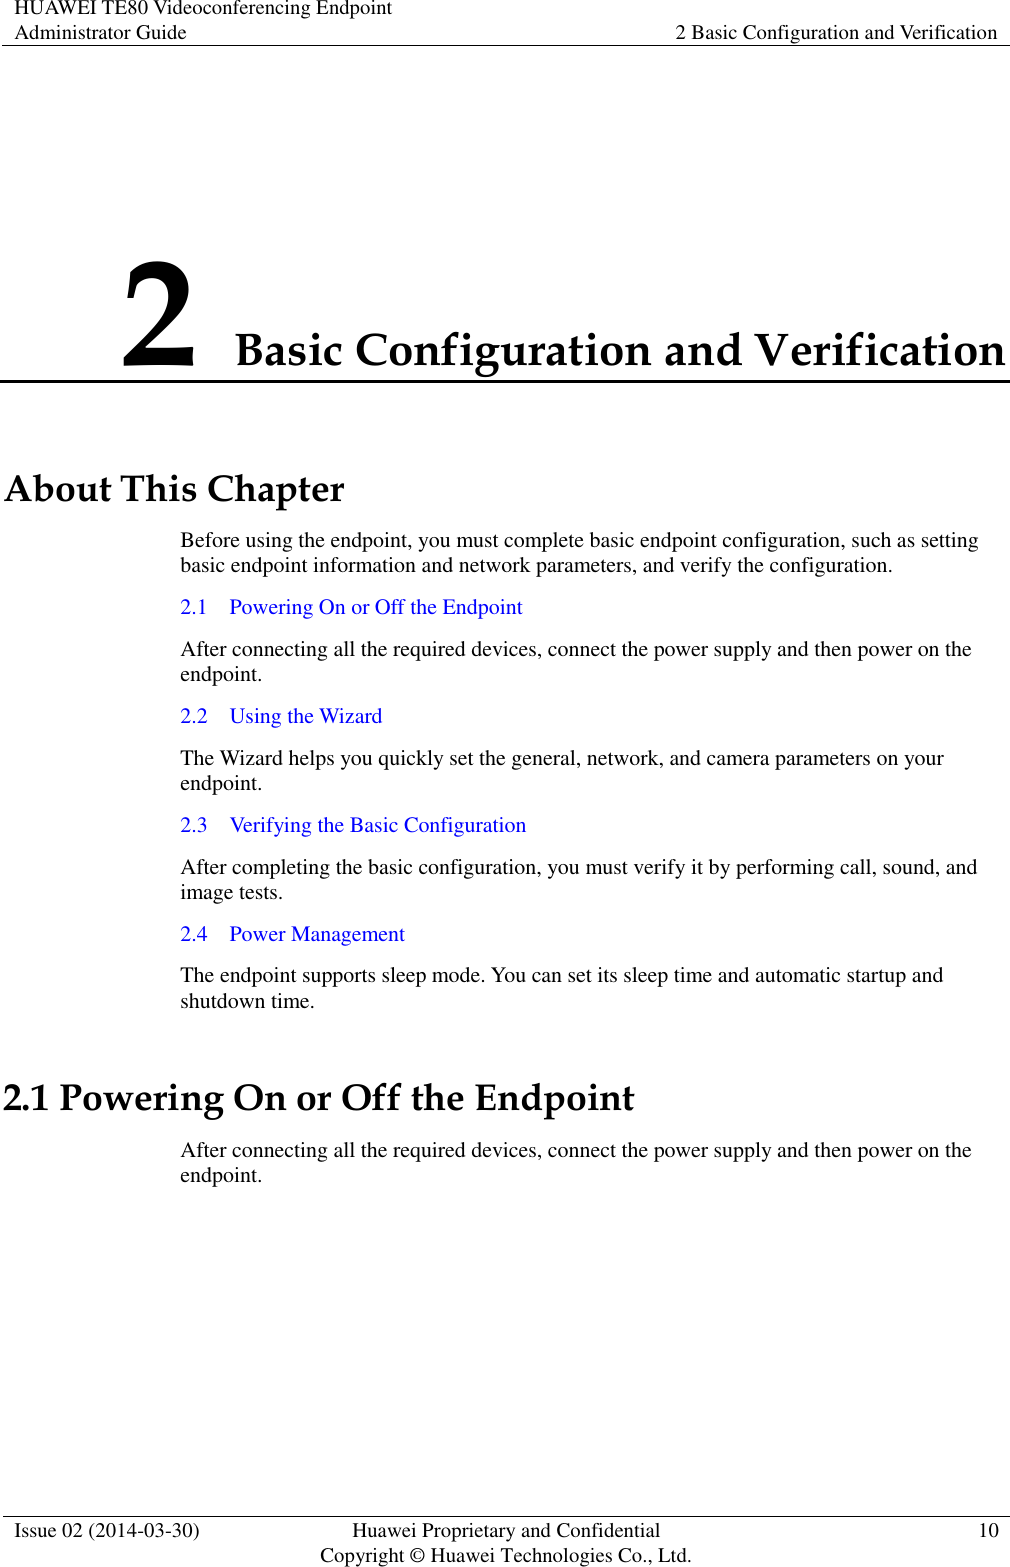 HUAWEI TE80 Videoconferencing Endpoint Administrator Guide 2 Basic Configuration and Verification  Issue 02 (2014-03-30) Huawei Proprietary and Confidential Copyright © Huawei Technologies Co., Ltd. 10  2 Basic Configuration and Verification About This Chapter Before using the endpoint, you must complete basic endpoint configuration, such as setting basic endpoint information and network parameters, and verify the configuration. 2.1    Powering On or Off the Endpoint After connecting all the required devices, connect the power supply and then power on the endpoint. 2.2    Using the Wizard The Wizard helps you quickly set the general, network, and camera parameters on your endpoint. 2.3    Verifying the Basic Configuration After completing the basic configuration, you must verify it by performing call, sound, and image tests. 2.4    Power Management The endpoint supports sleep mode. You can set its sleep time and automatic startup and shutdown time. 2.1 Powering On or Off the Endpoint After connecting all the required devices, connect the power supply and then power on the endpoint.  